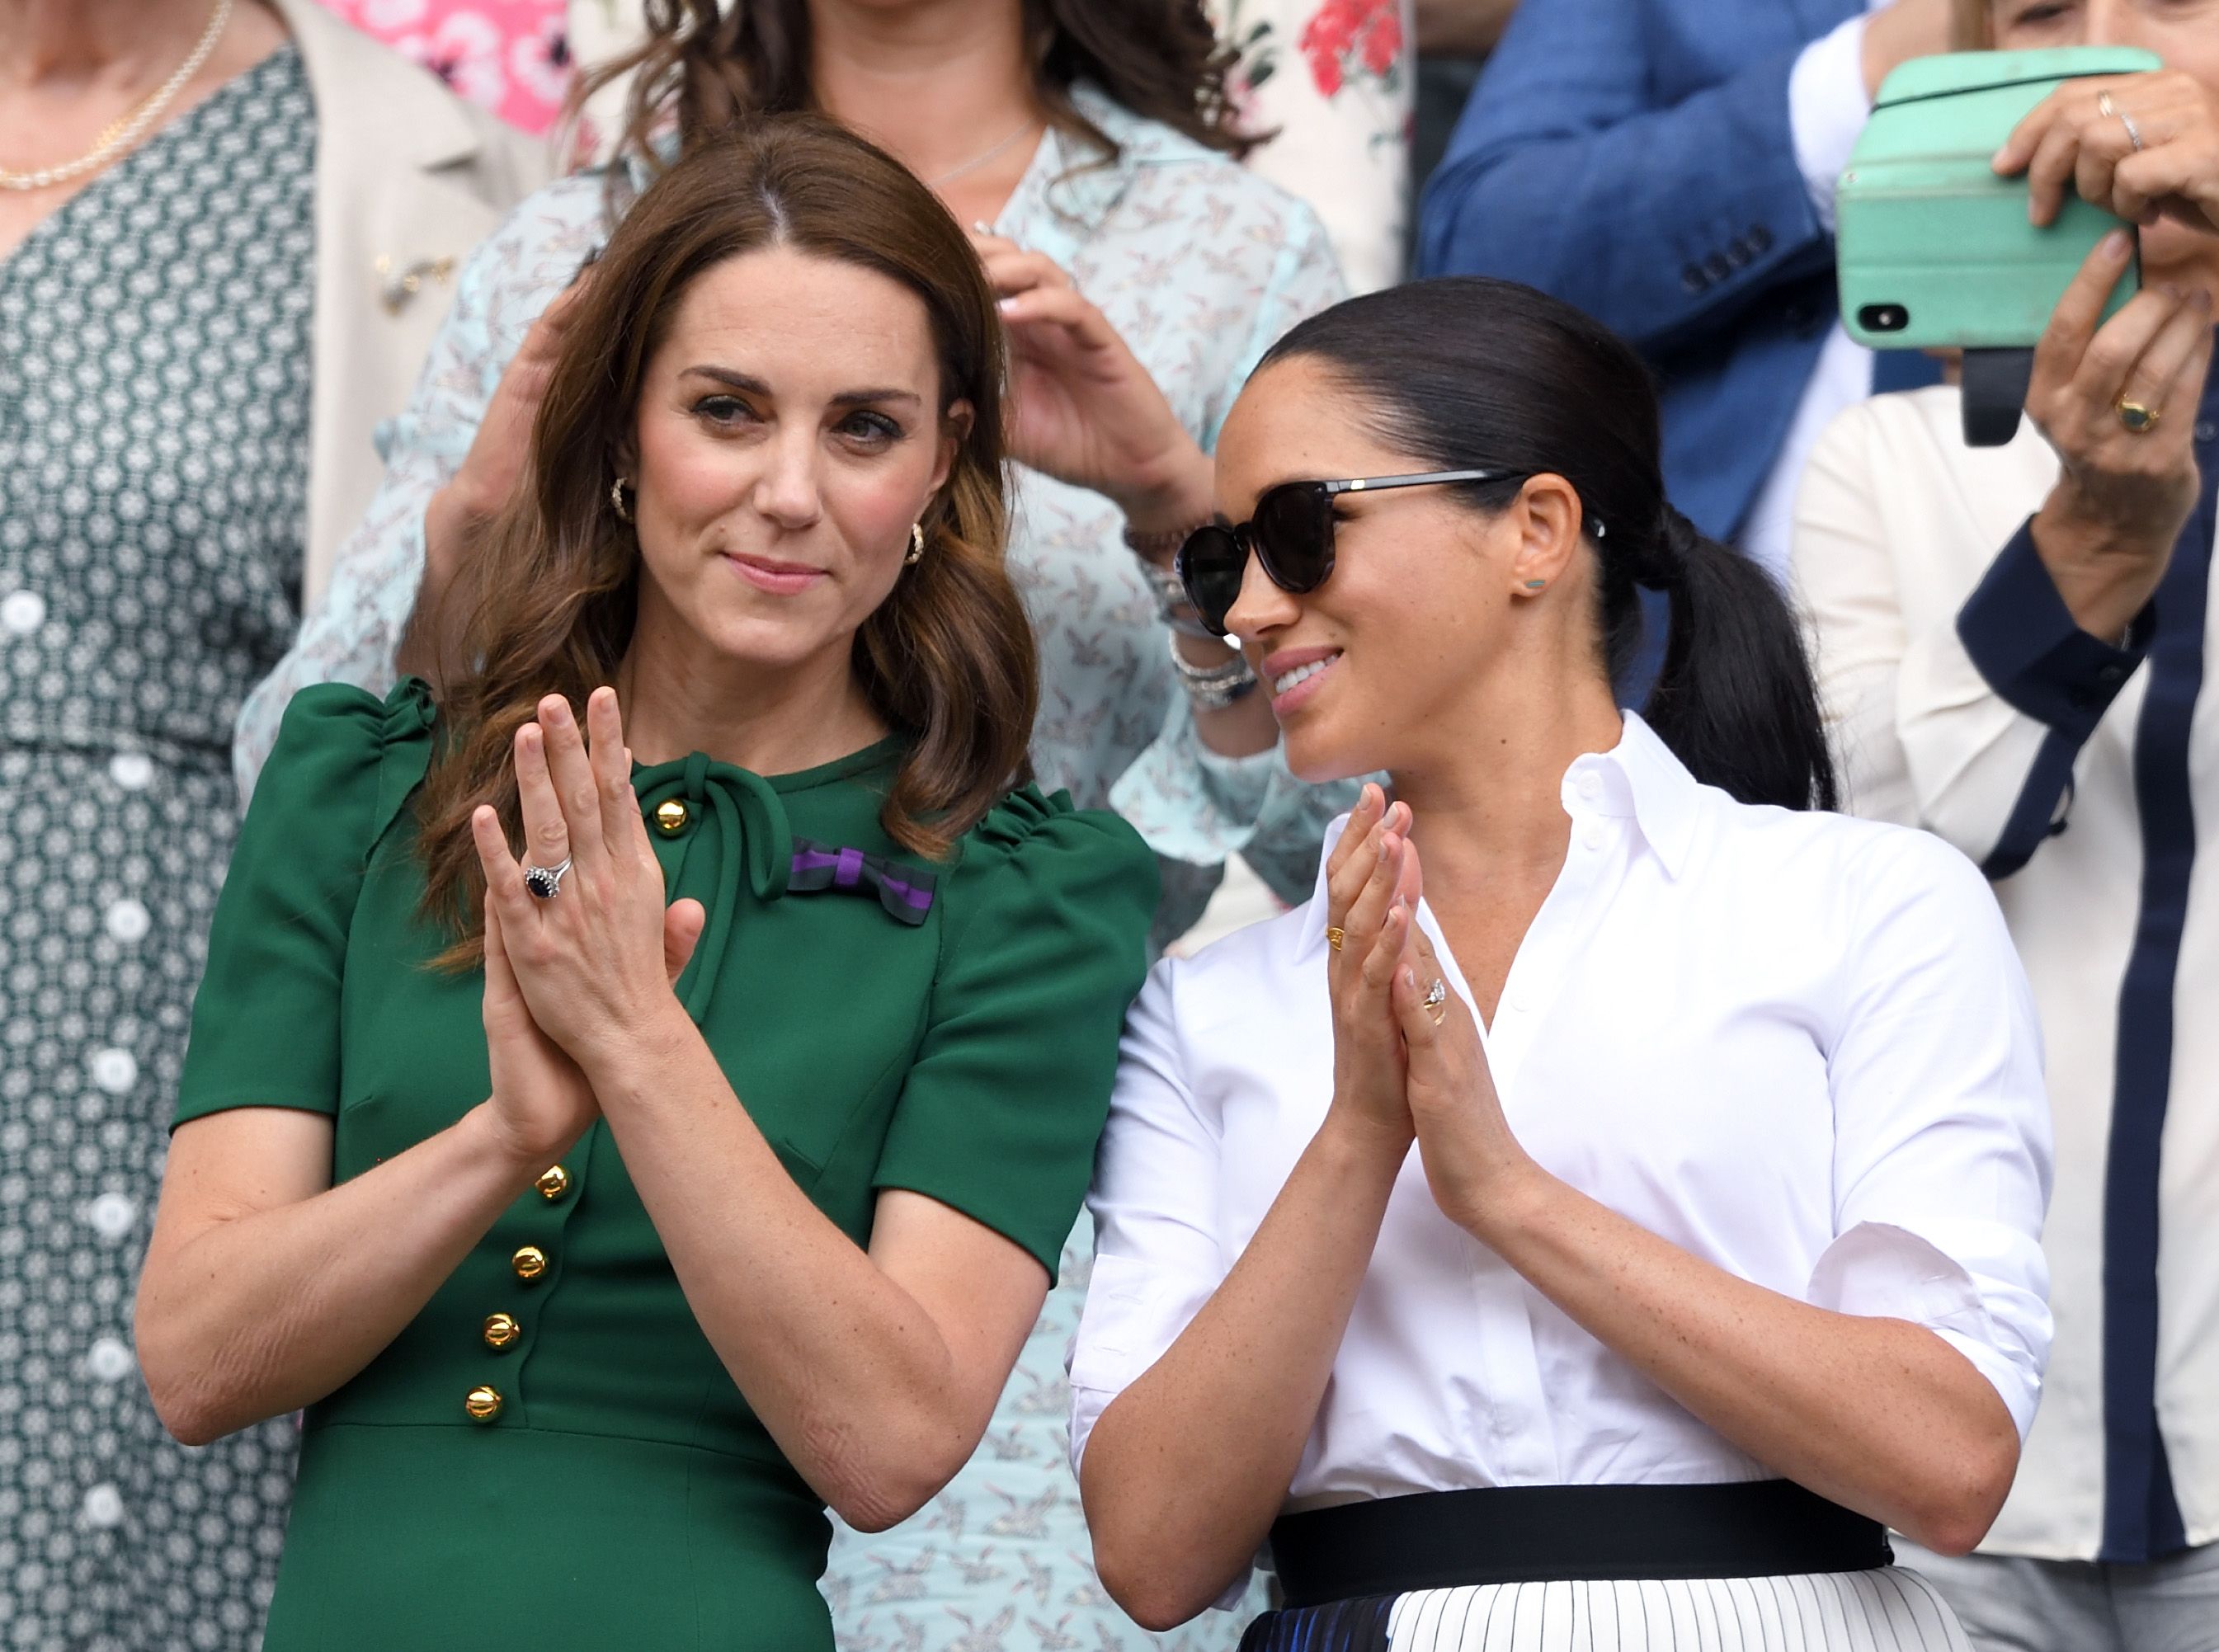 Kate Middleton and Meghan Markle in the Royal Box at day twelve of the Wimbledon Tennis Championships at All England Lawn Tennis and Croquet Club on July 13, 2019 | Photo: Getty Images